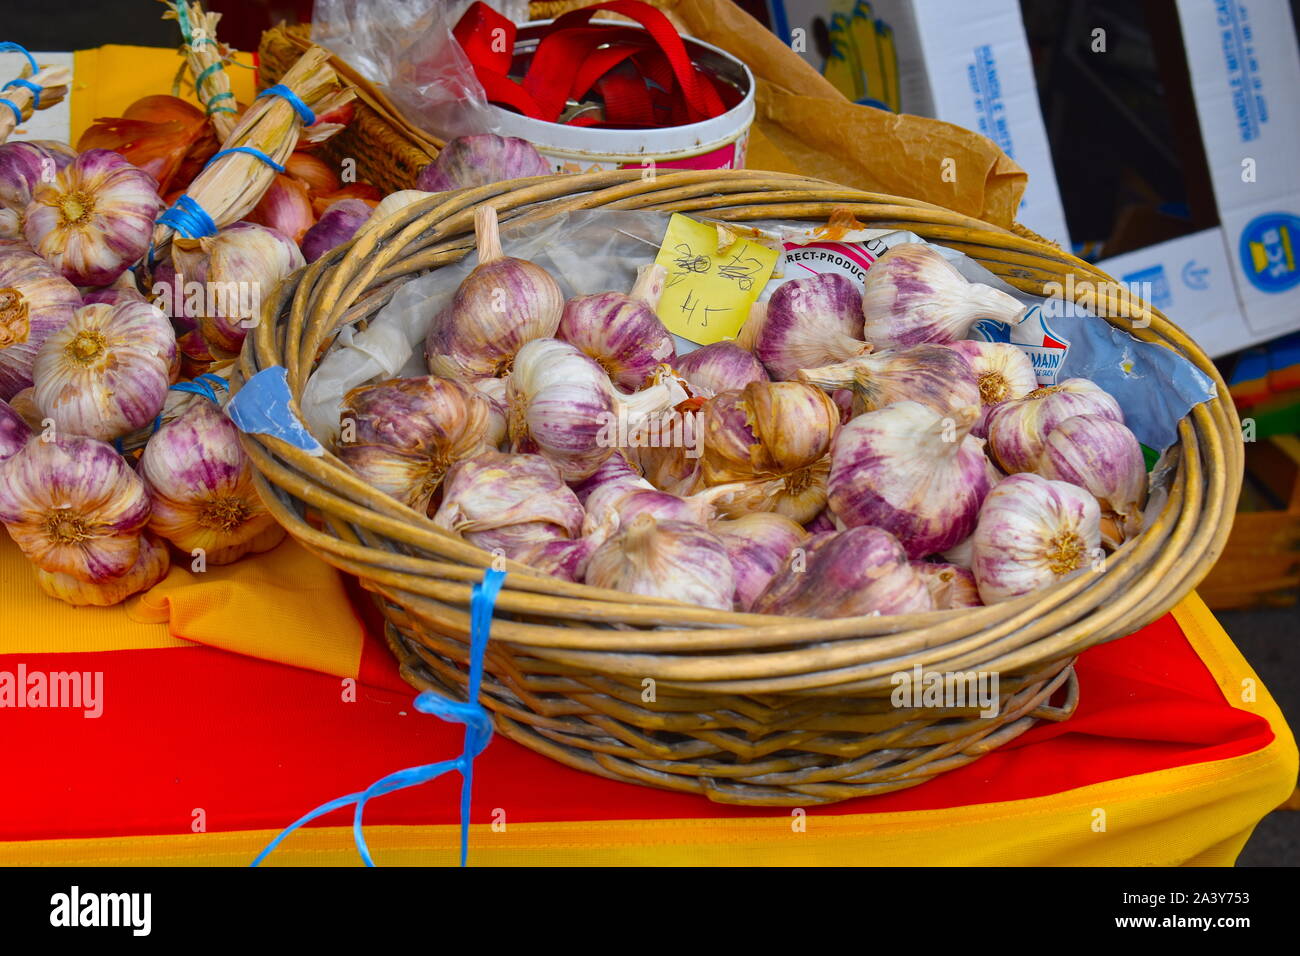 Pink and white garlic bulbs Catalan produce on market stall in French medieval town. Organic produce for sale directly from the European farmers. Stock Photo